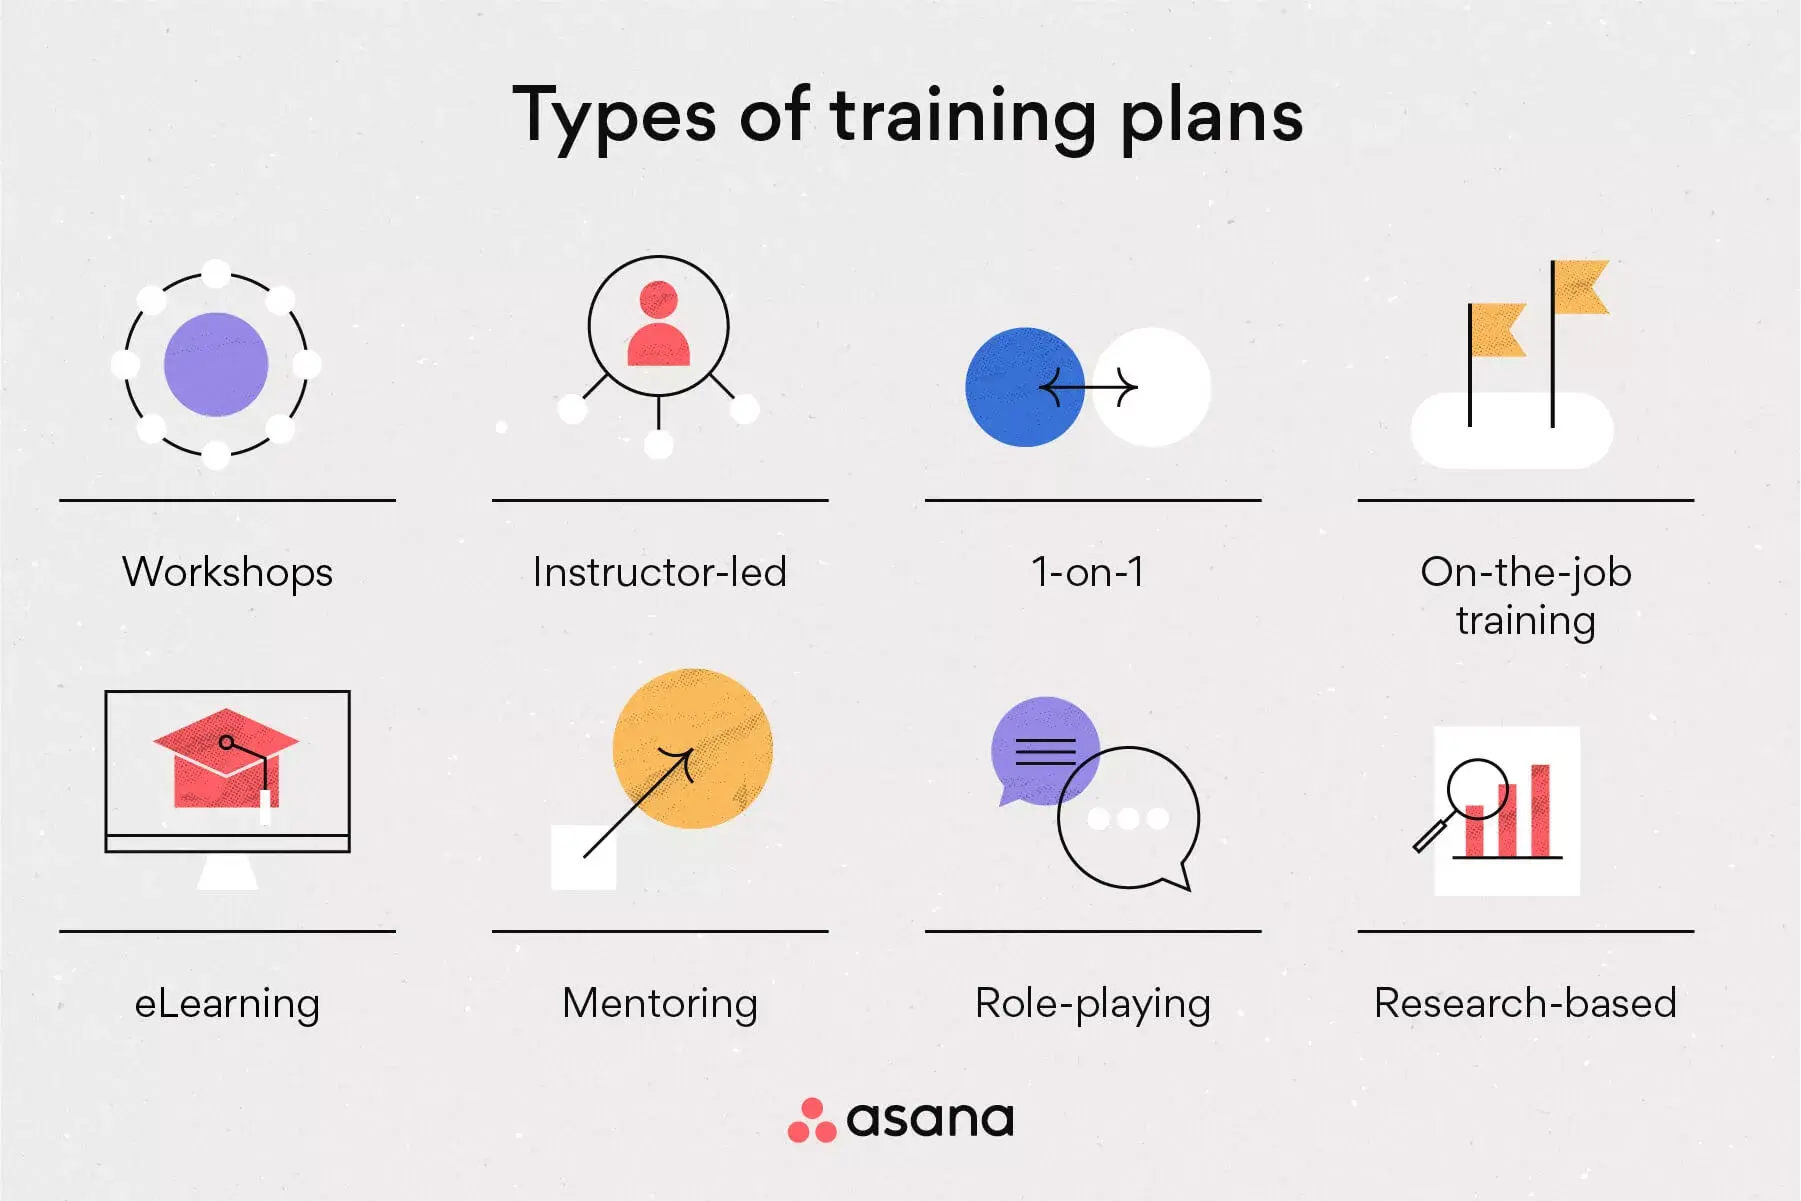 [inline illustration] Types of training plans (infographic)